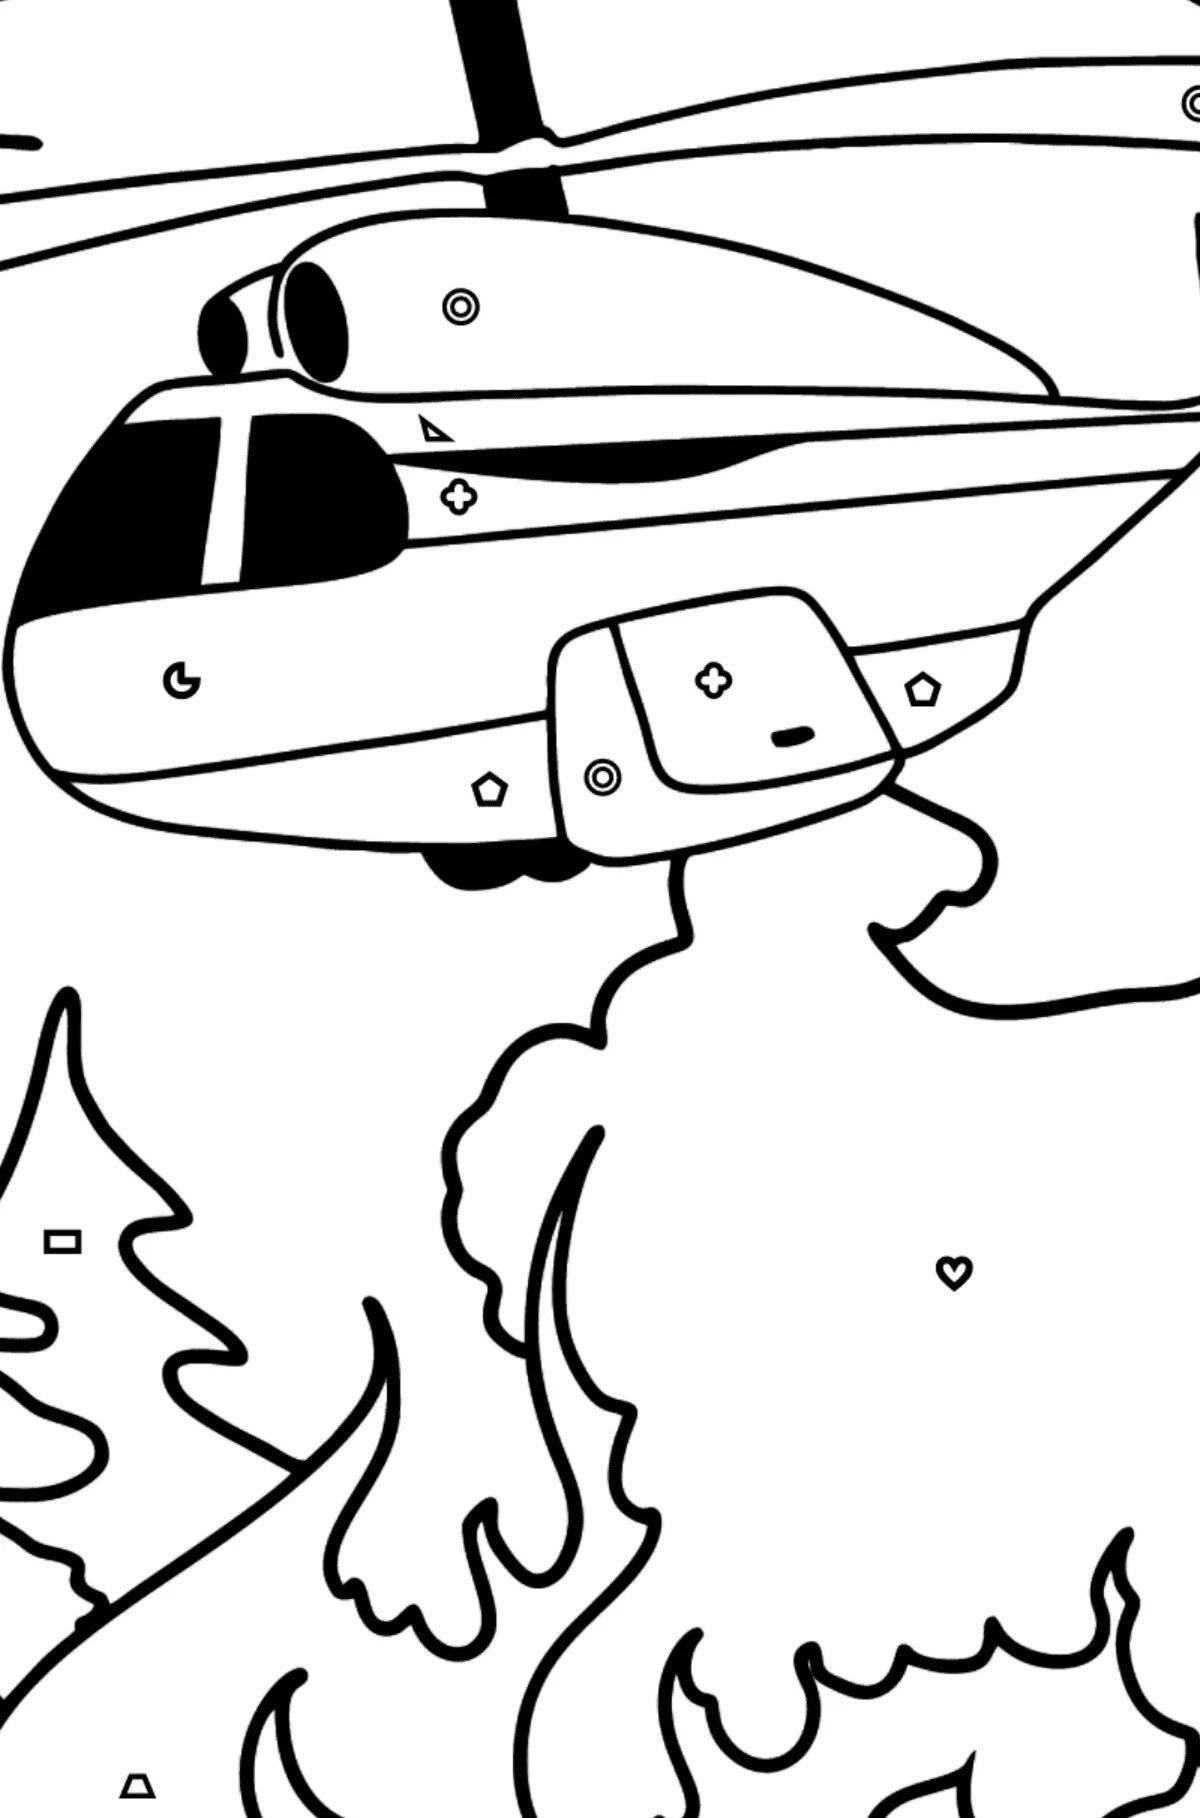 Flawless Fire Helicopter Coloring Page